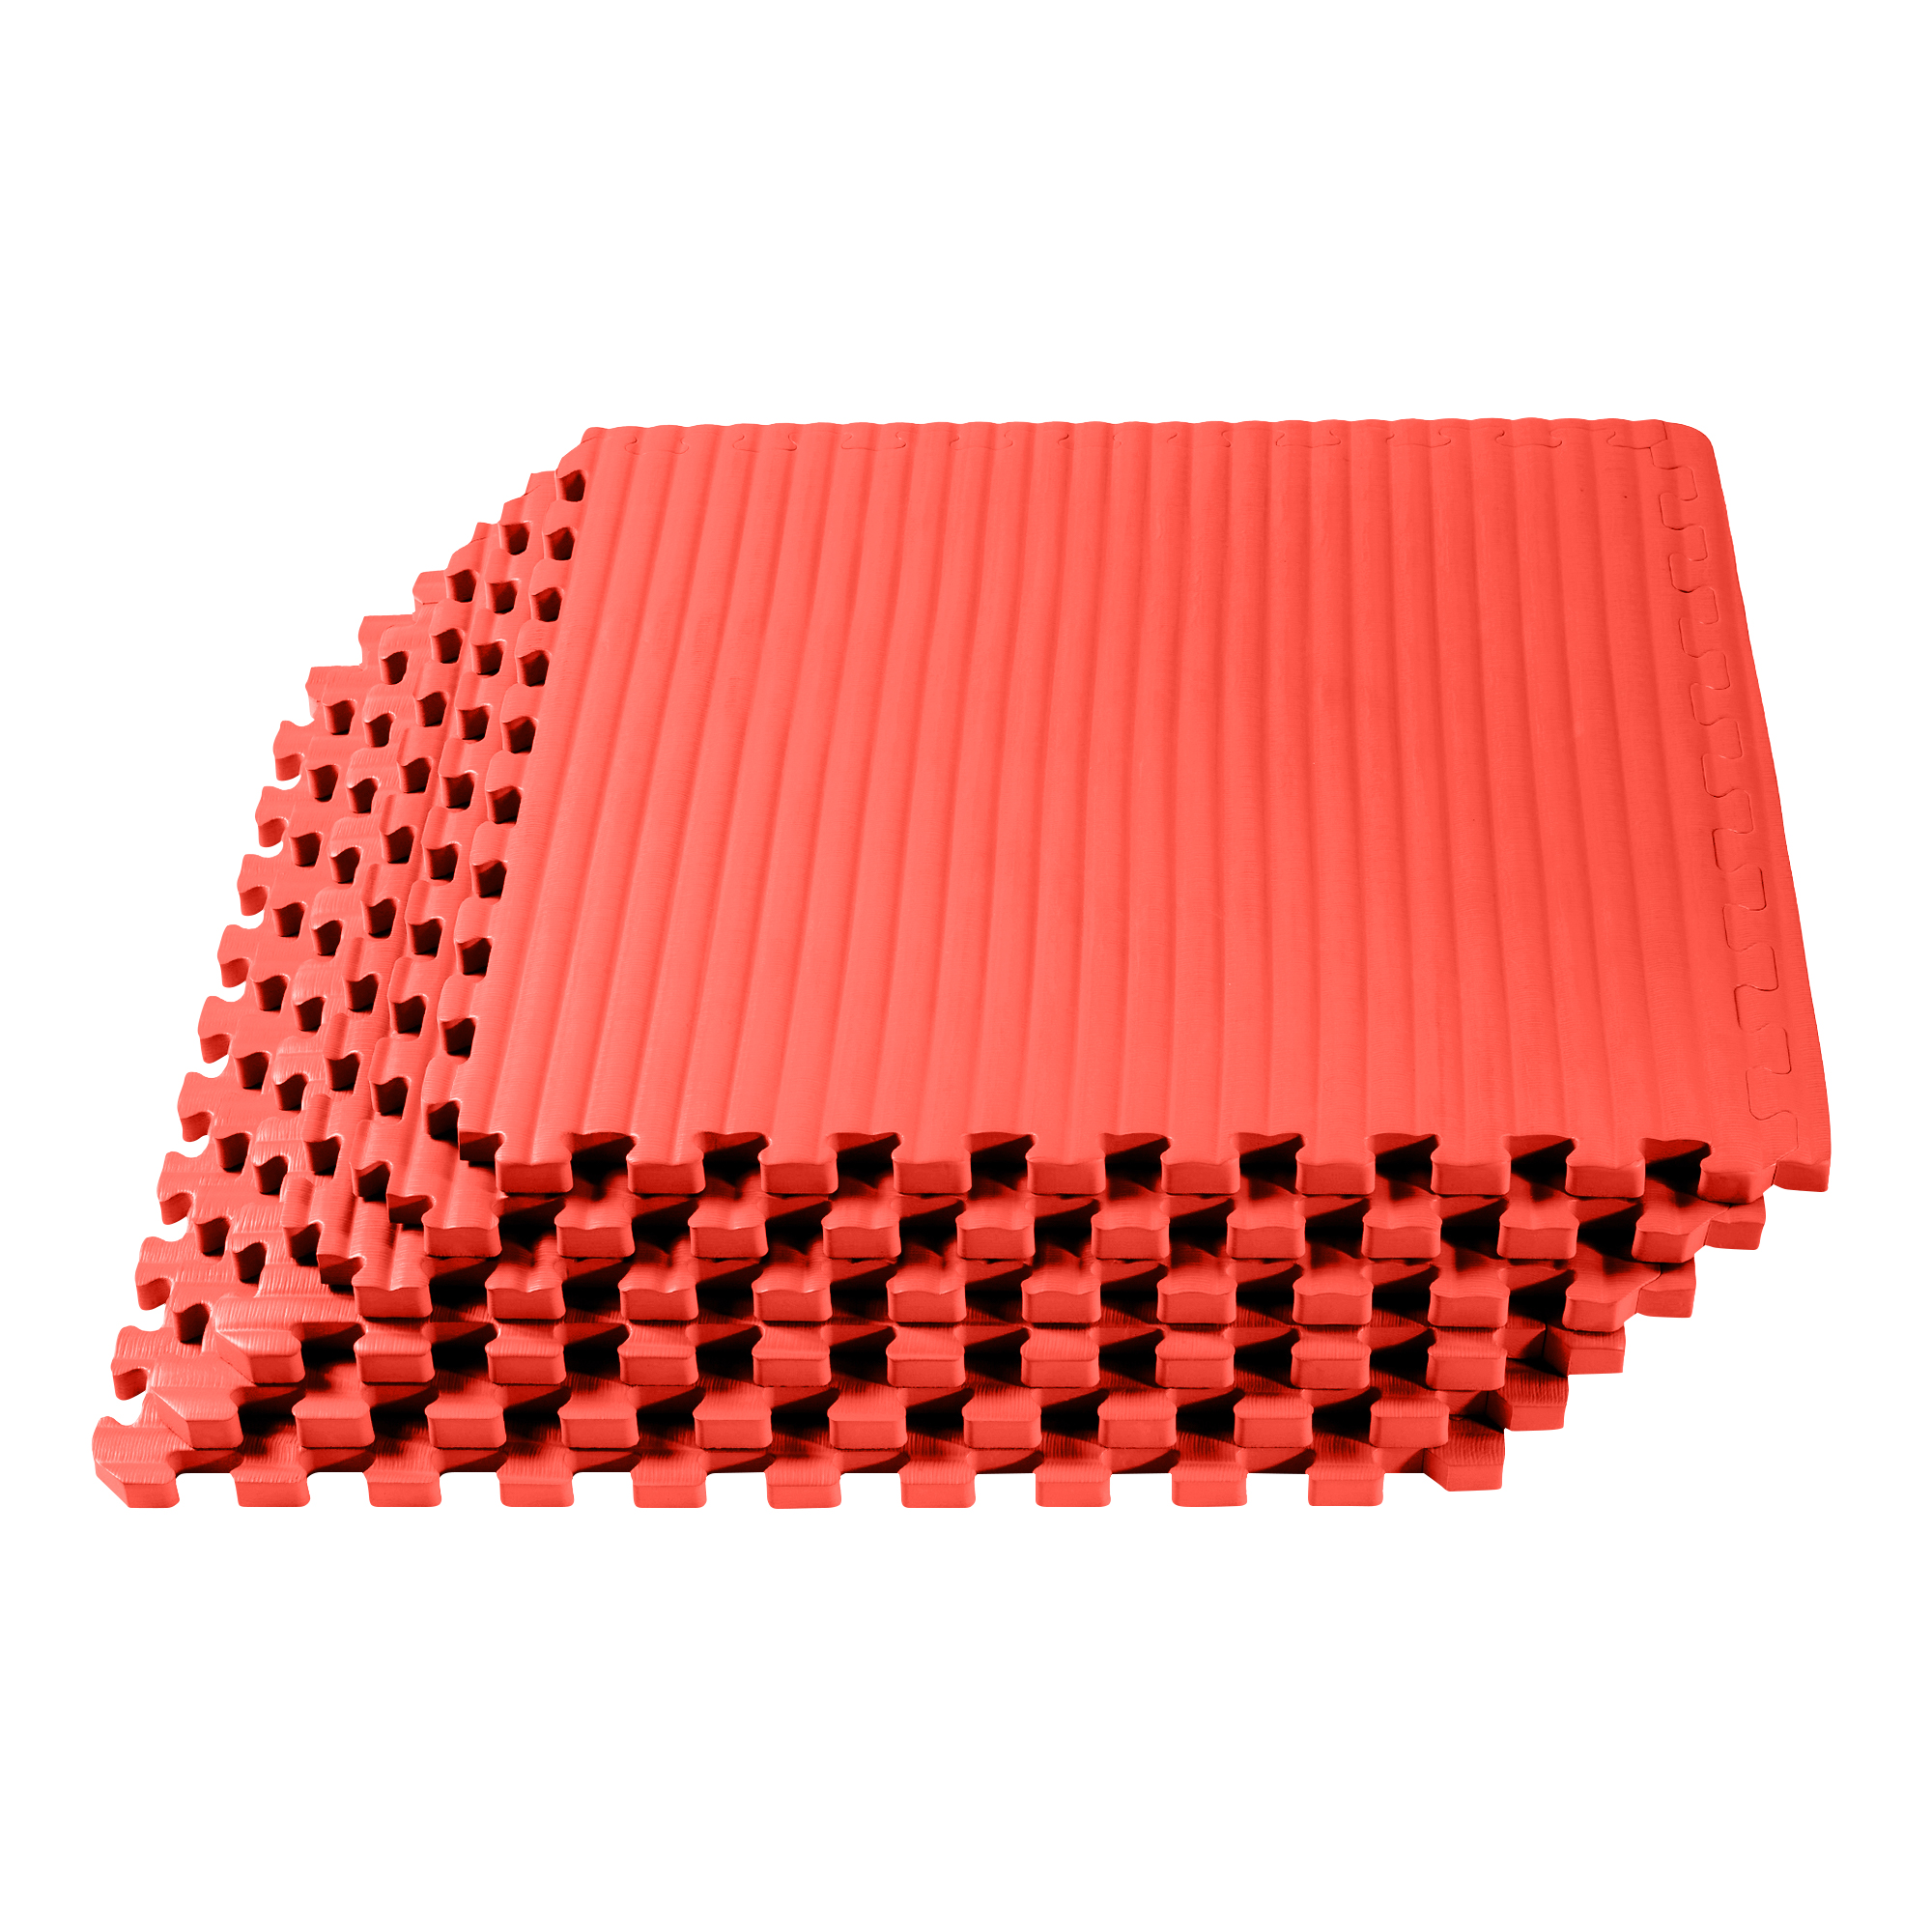 We Sell Mats 1 Inch Thick Martial Arts EVA Foam Exercise Mat, Tatami Pattern, Interlocking Floor Tiles for Home Gym, MMA, Anti-Fatigue Mats, 24 in x 24 in - image 1 of 9